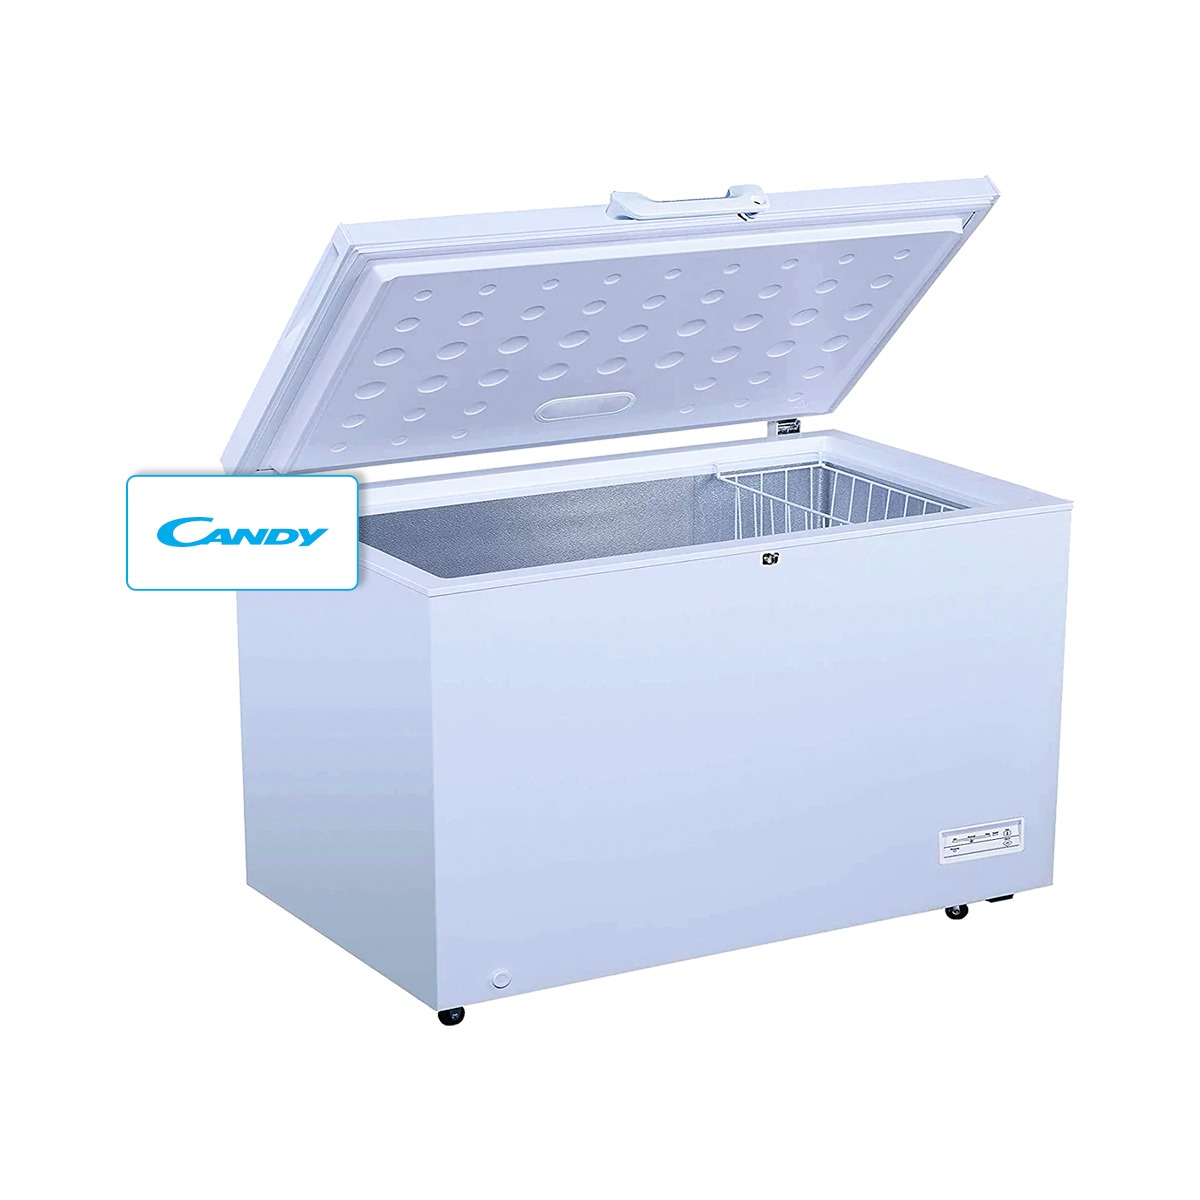 Cader Electromeubles - Candy 316L